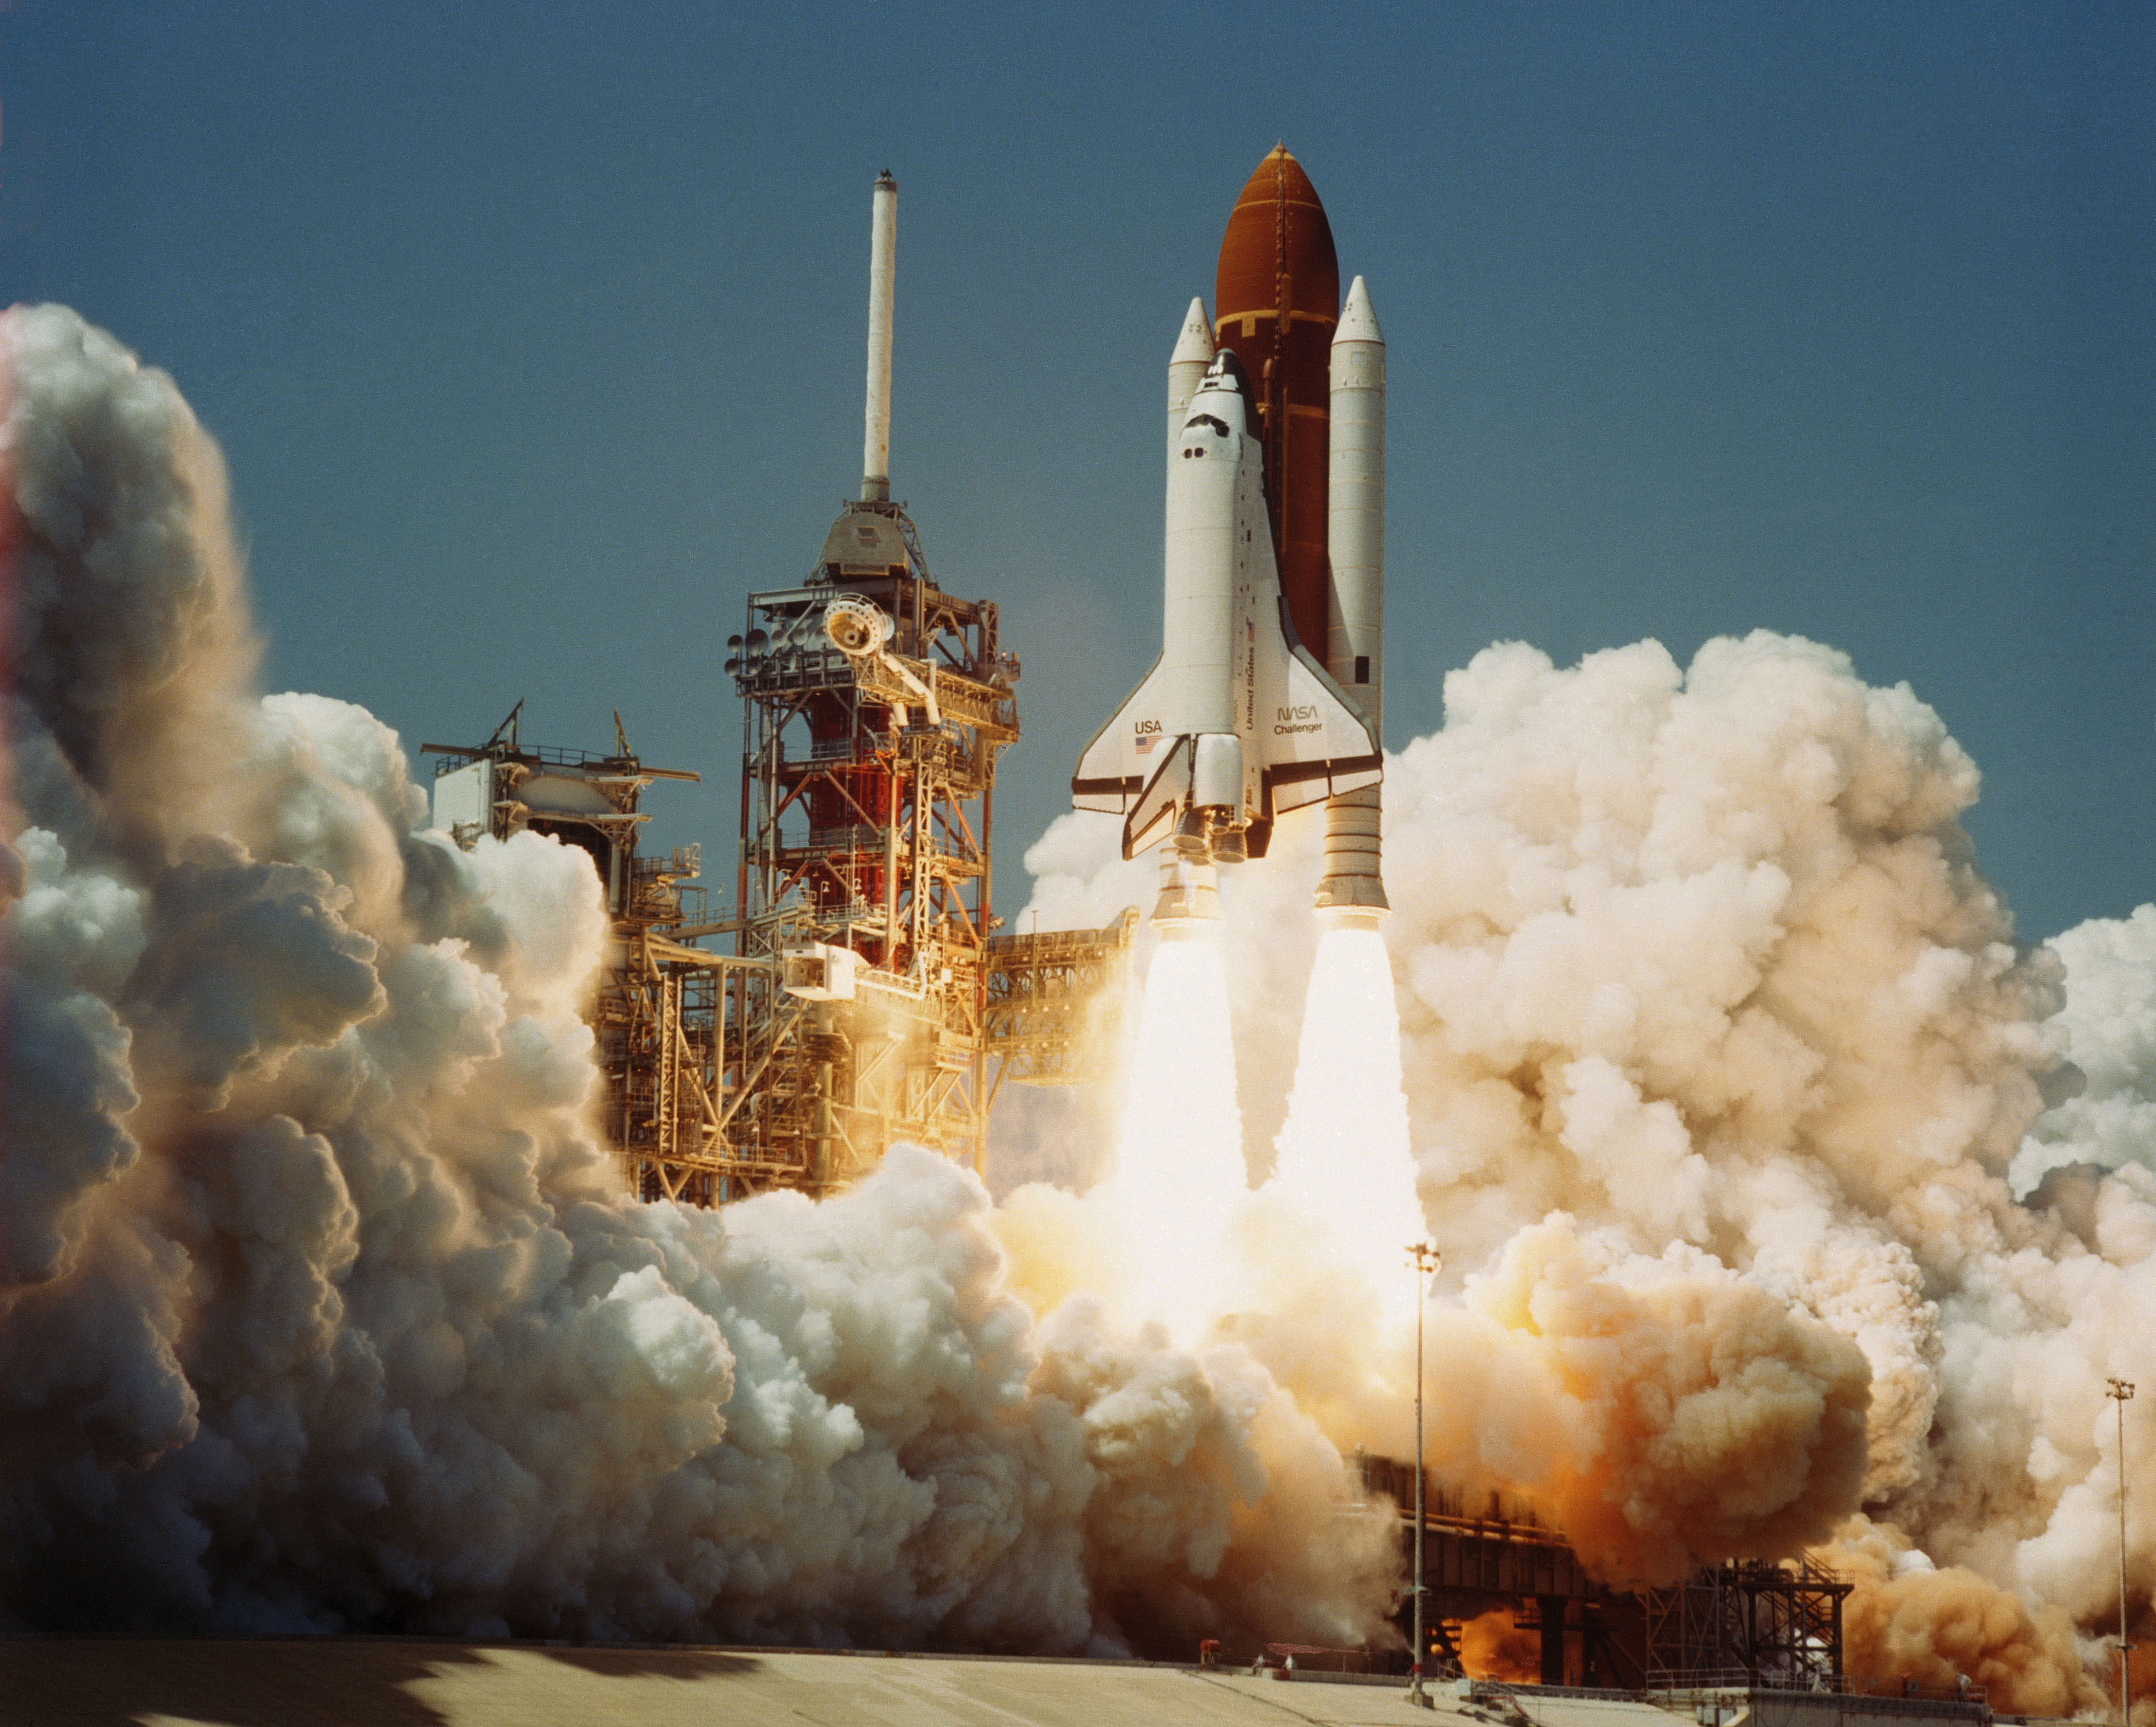 NASA's Space Shuttle Challenger lifts off for mission STS-61-A, its final successful mission